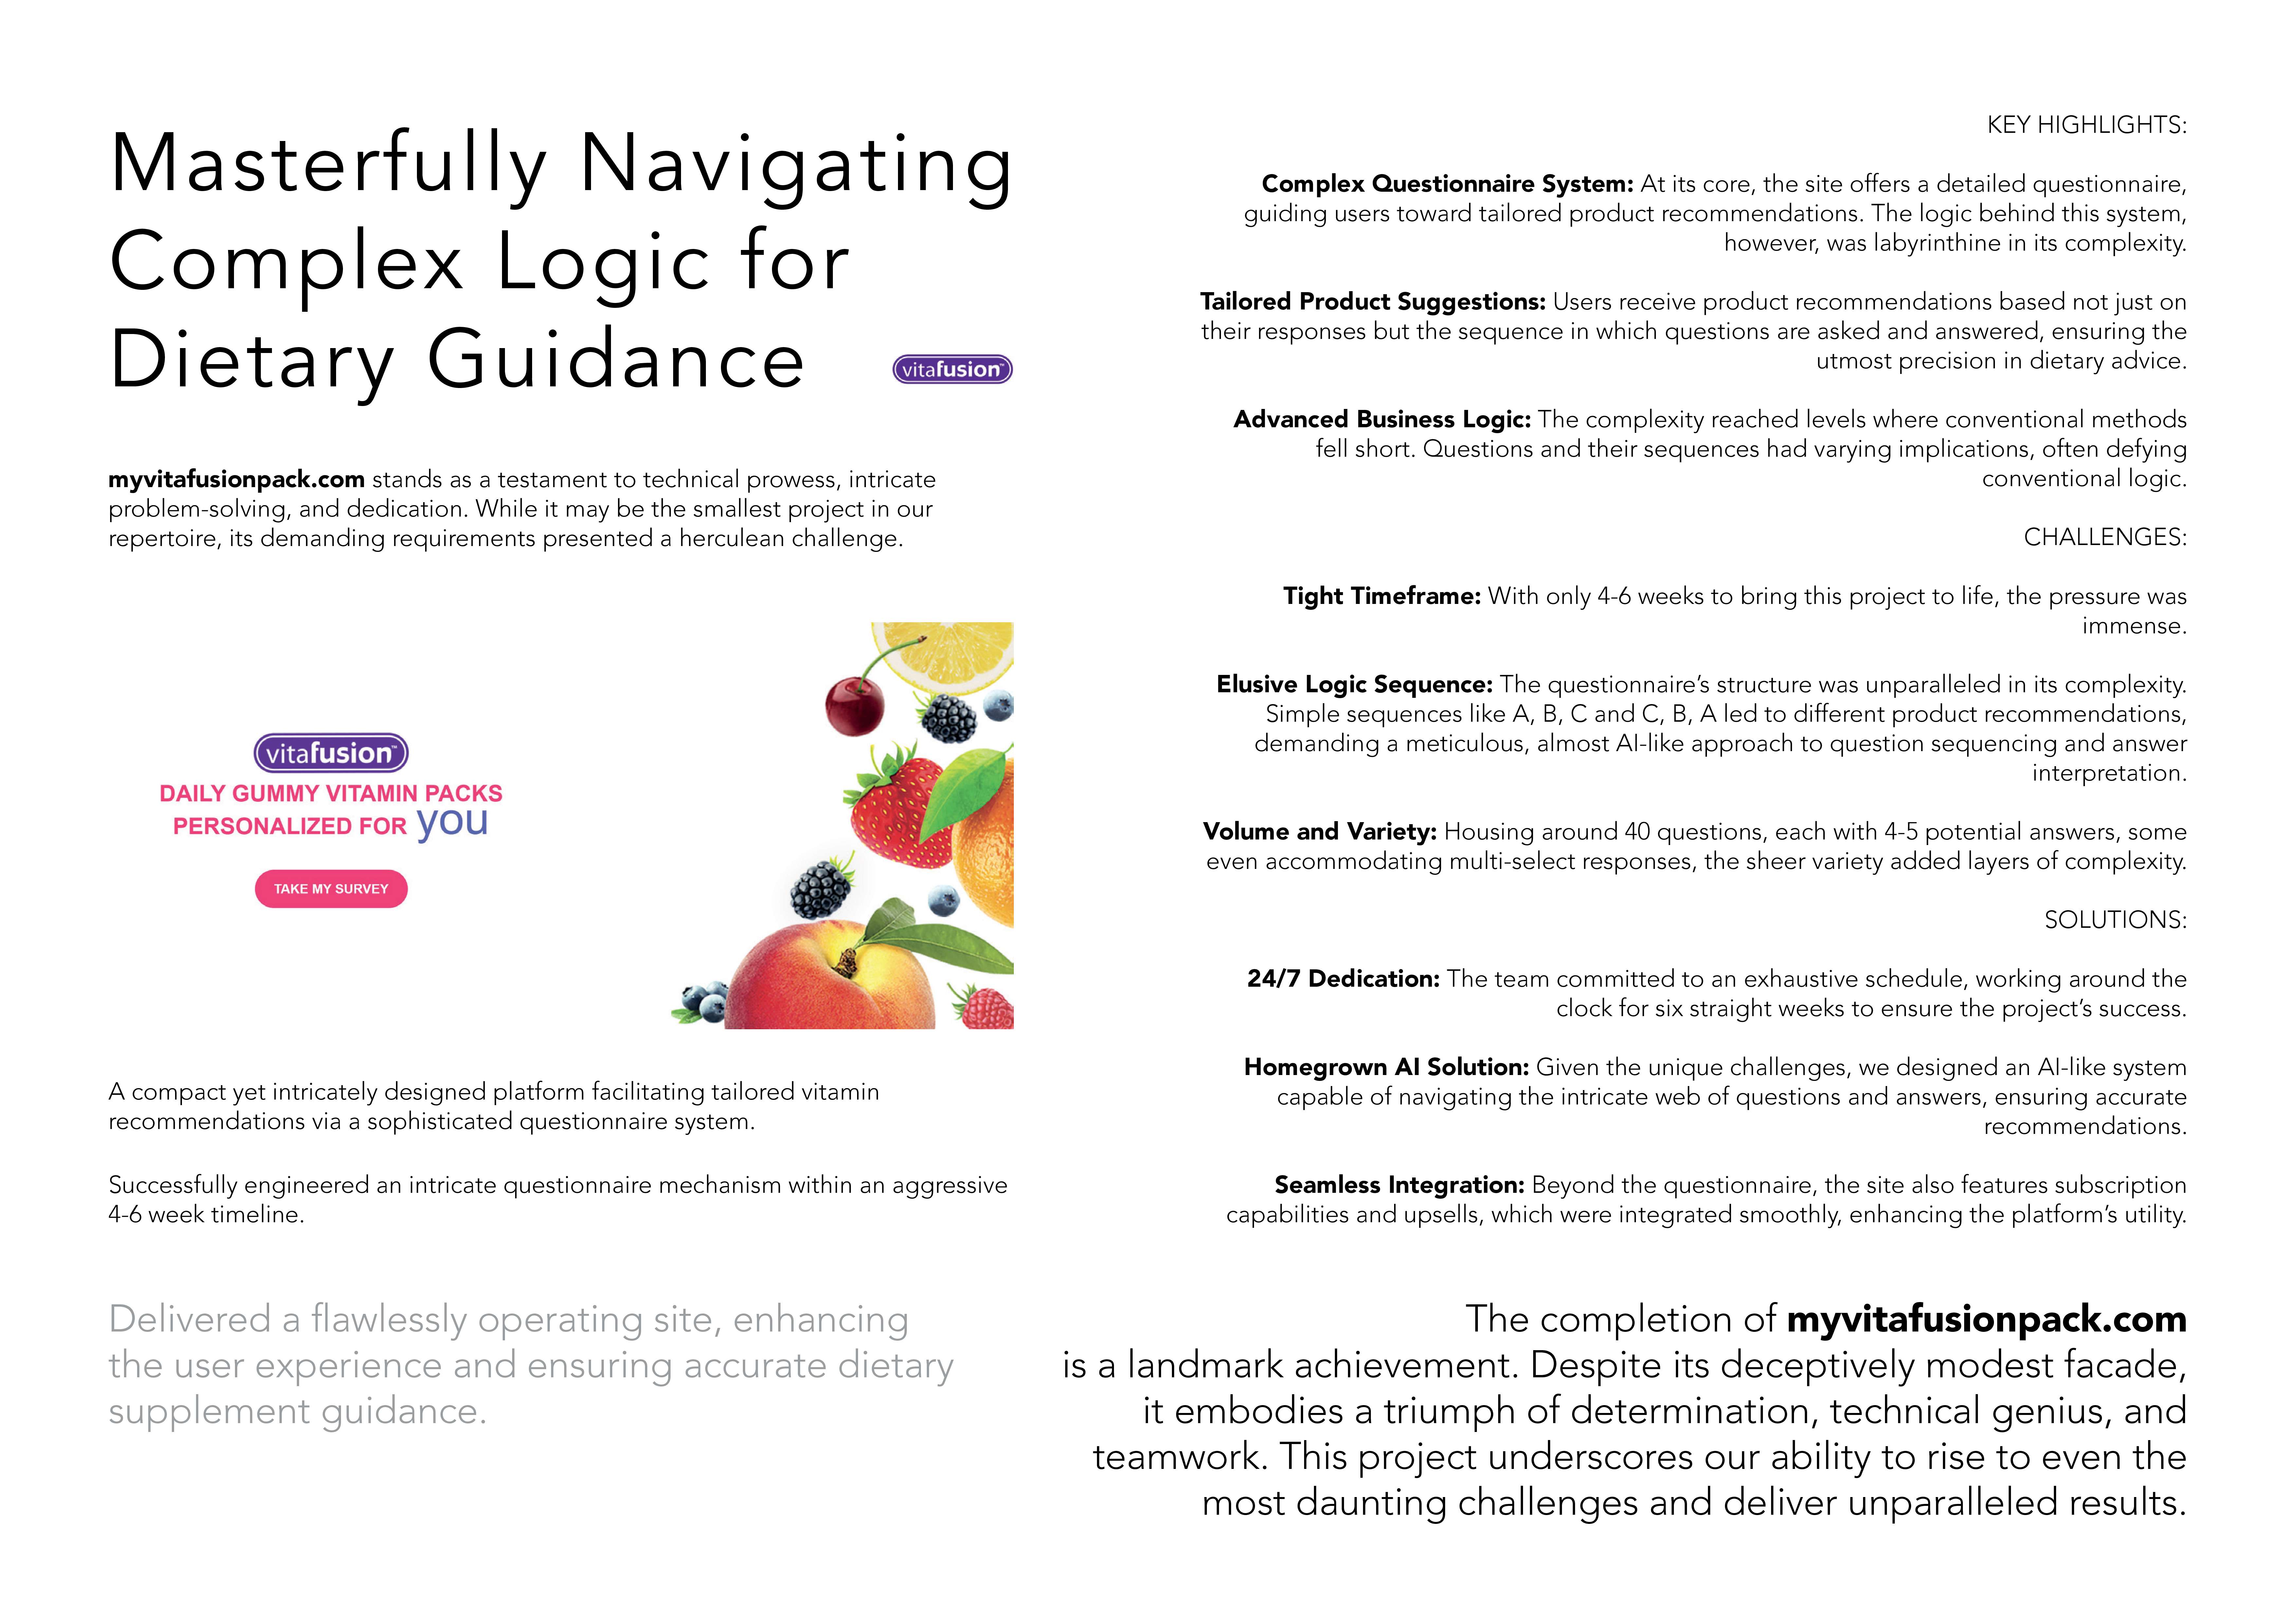 Masterfully Navigating Complex Logic for Dietary Guidance